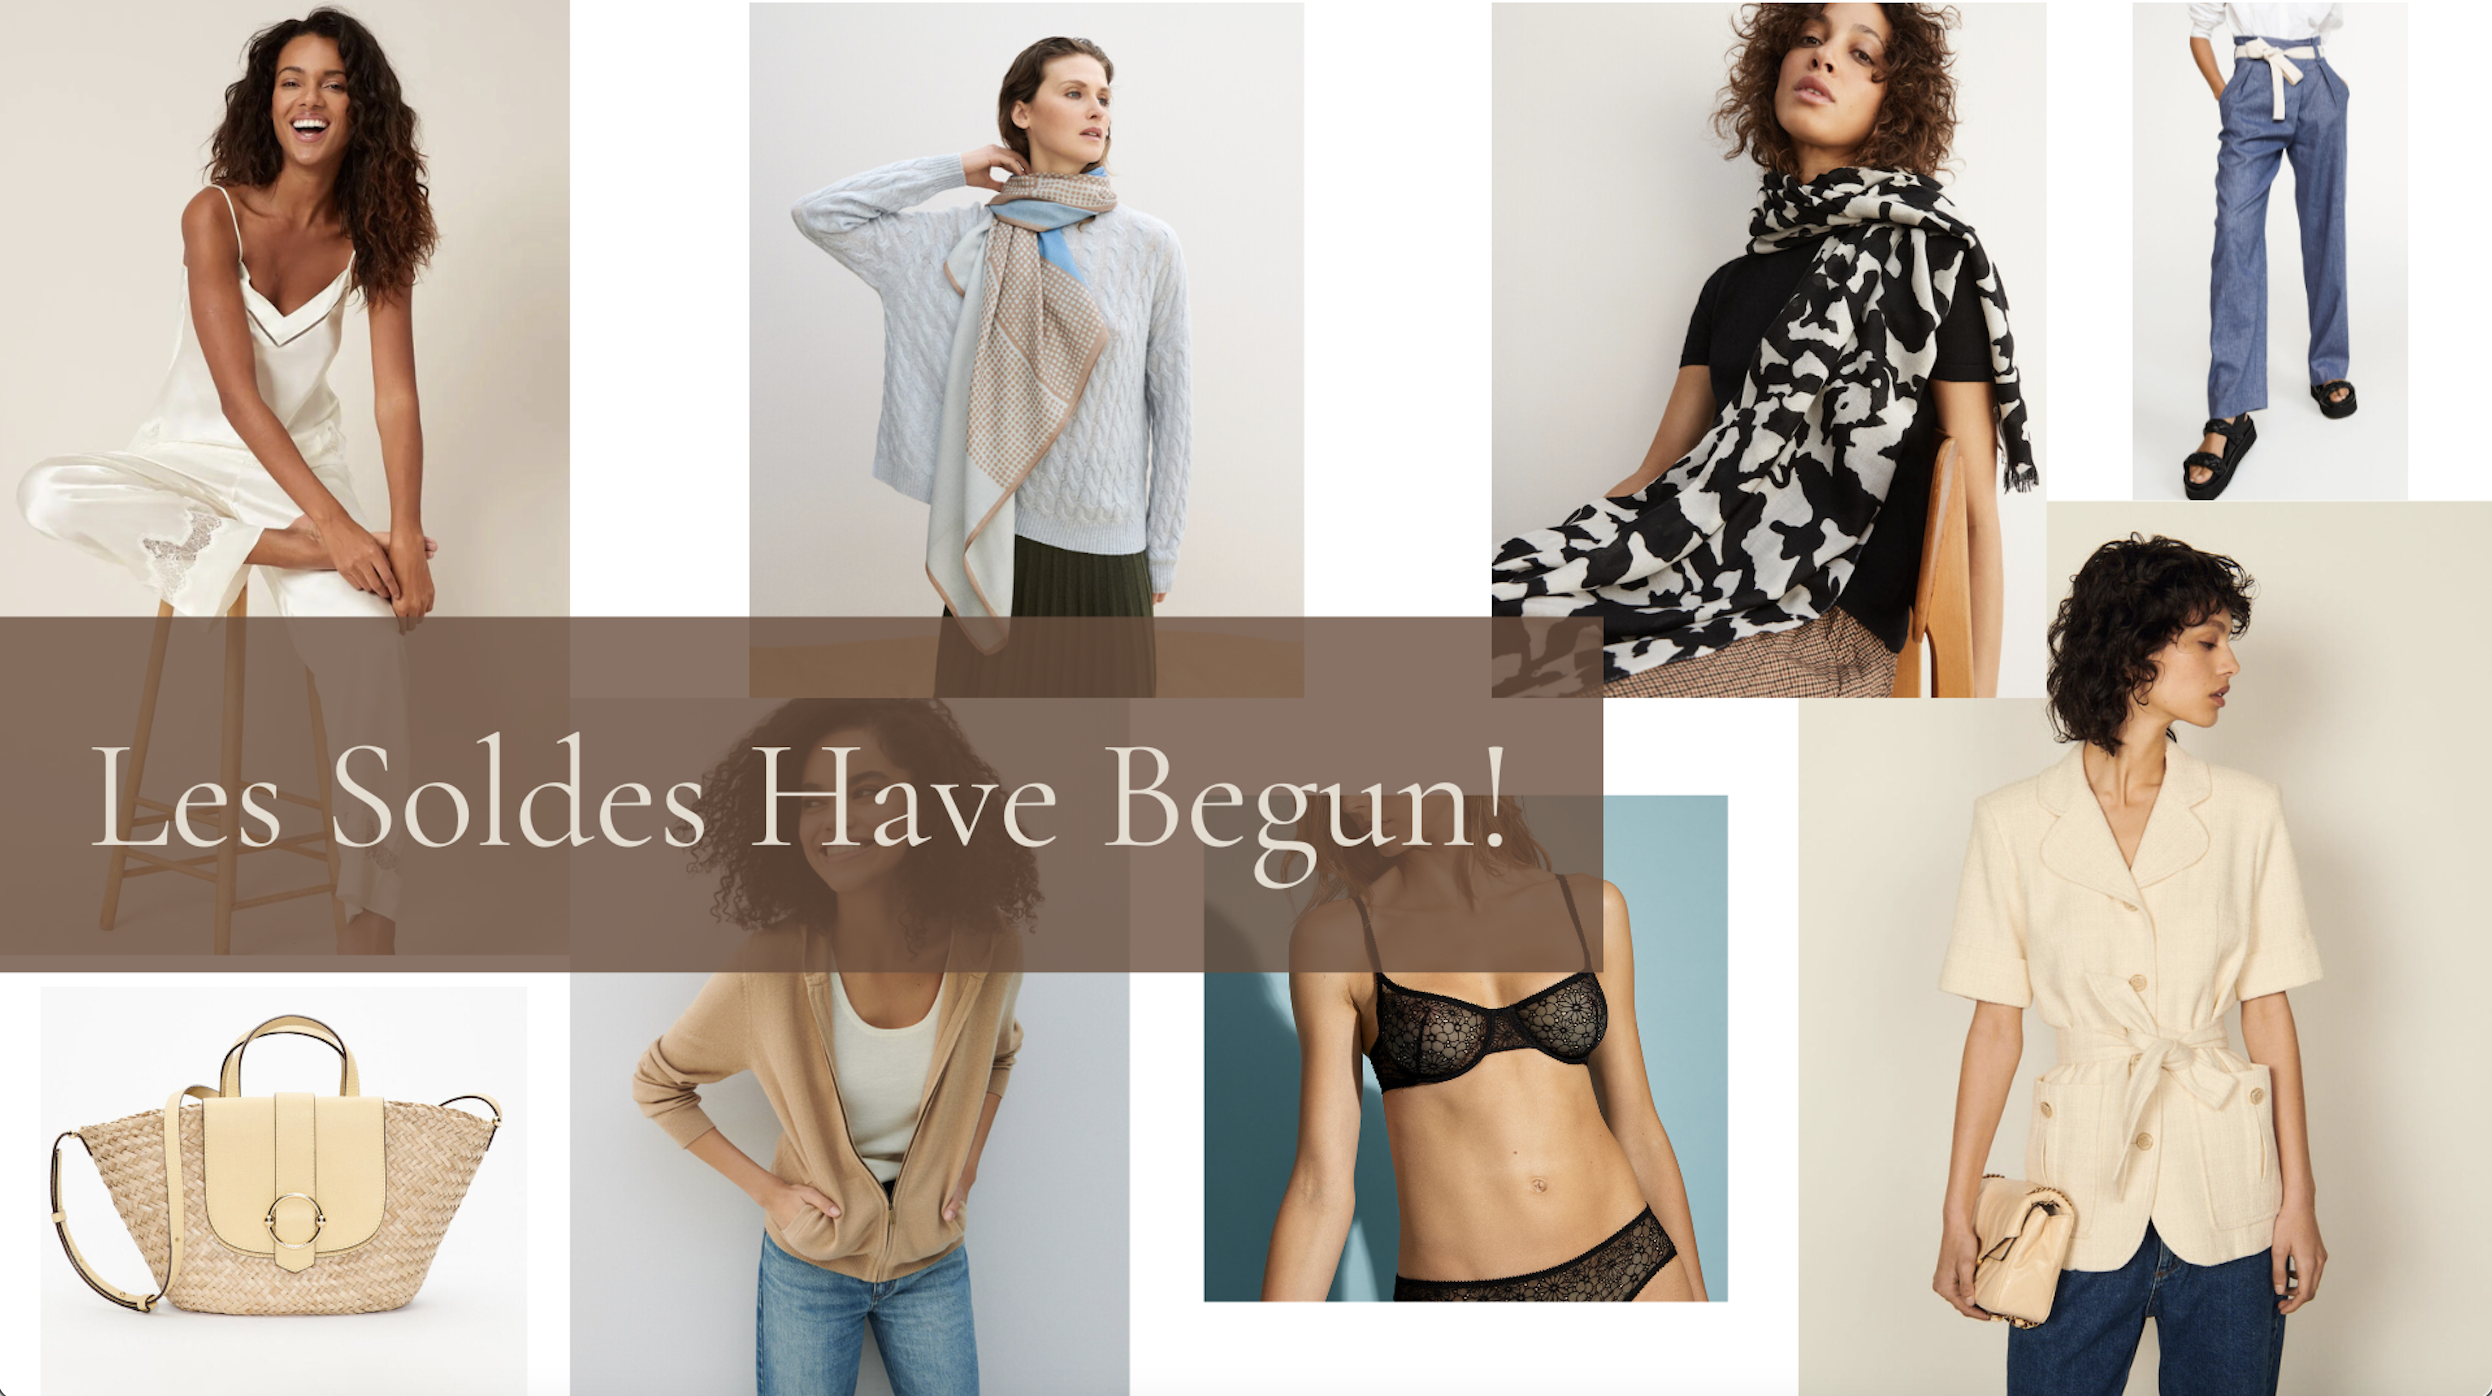 Les Soldes Are Happening! French Brands to Shop